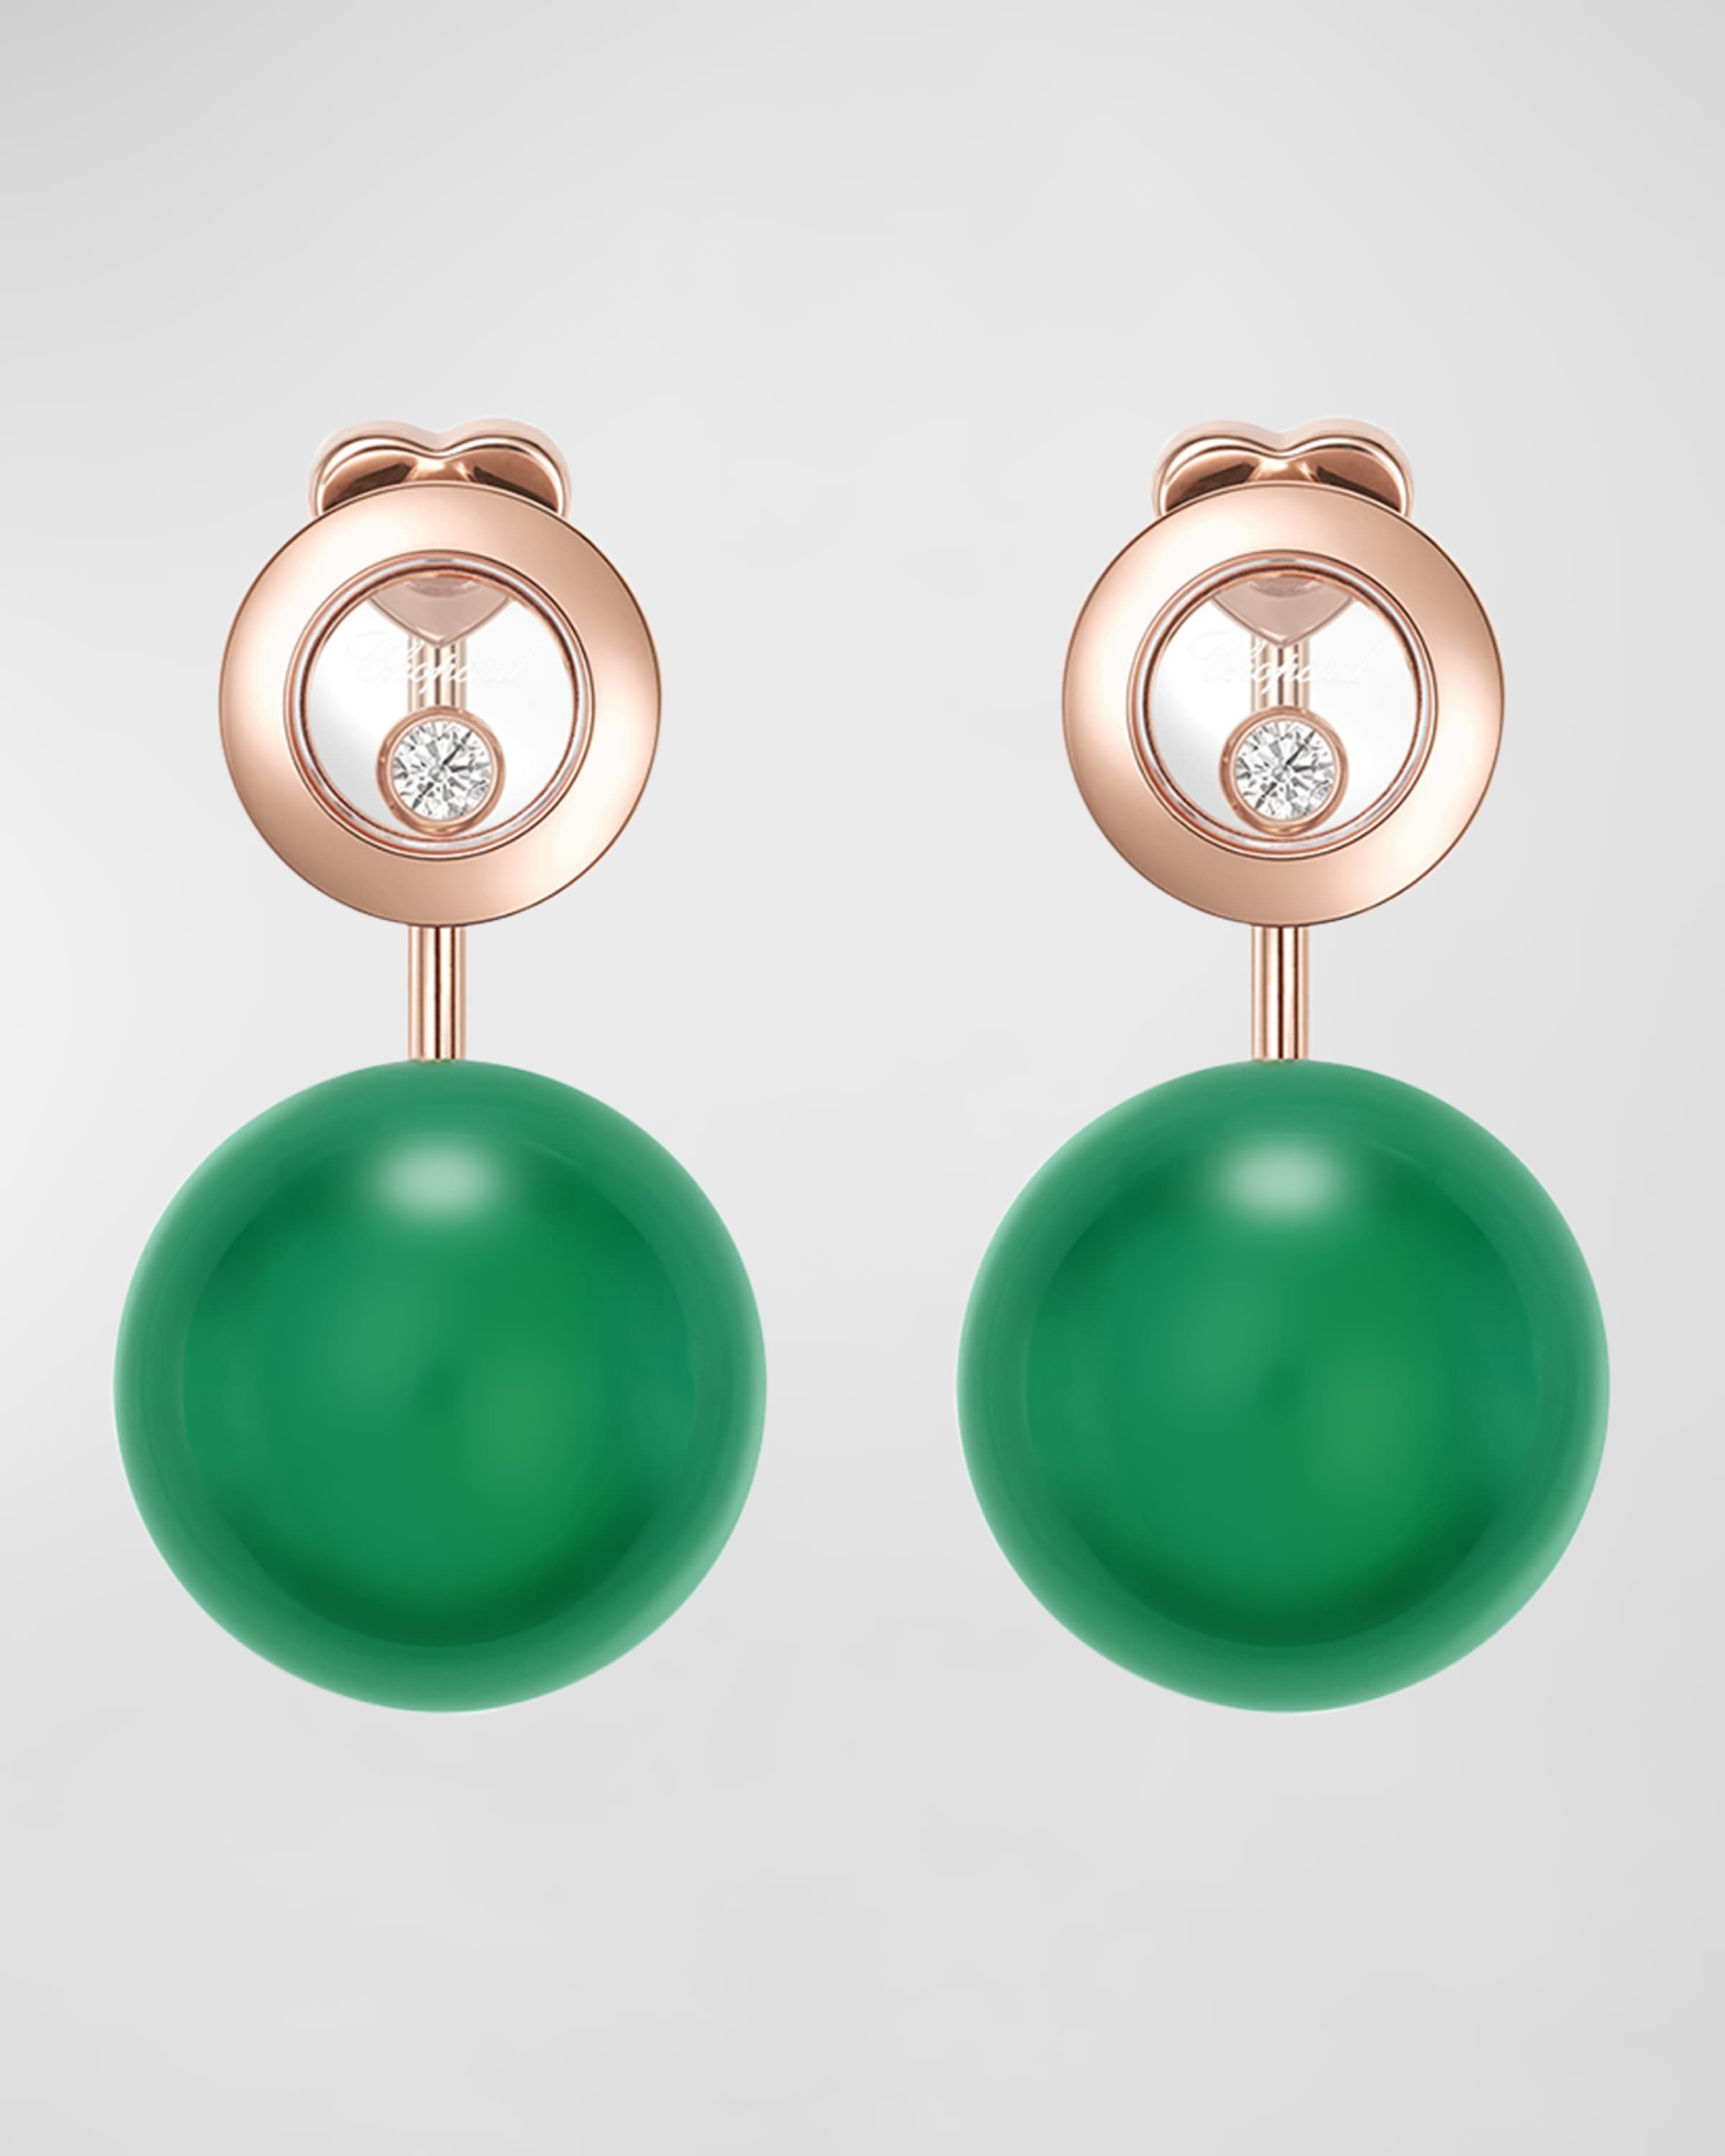 Happy Diamonds Planet 18K Rose Gold and Green Agate Earrings - 1